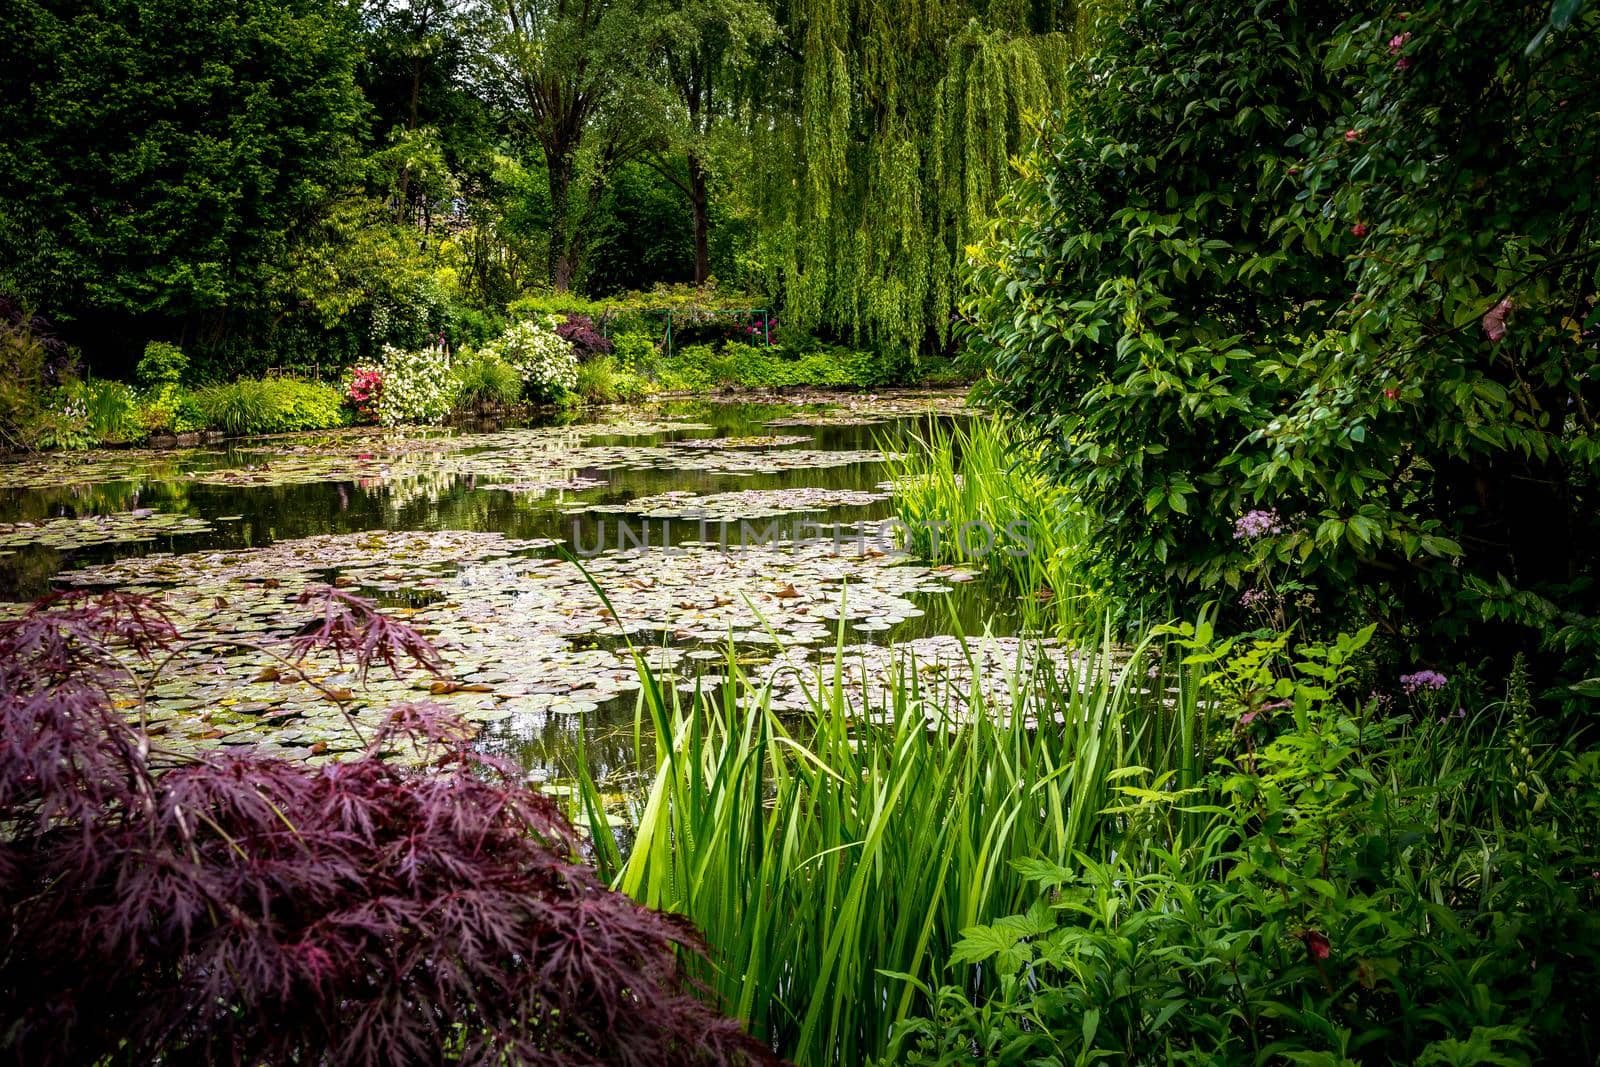 Pond, trees, and waterlilies in a french garden by photogolfer